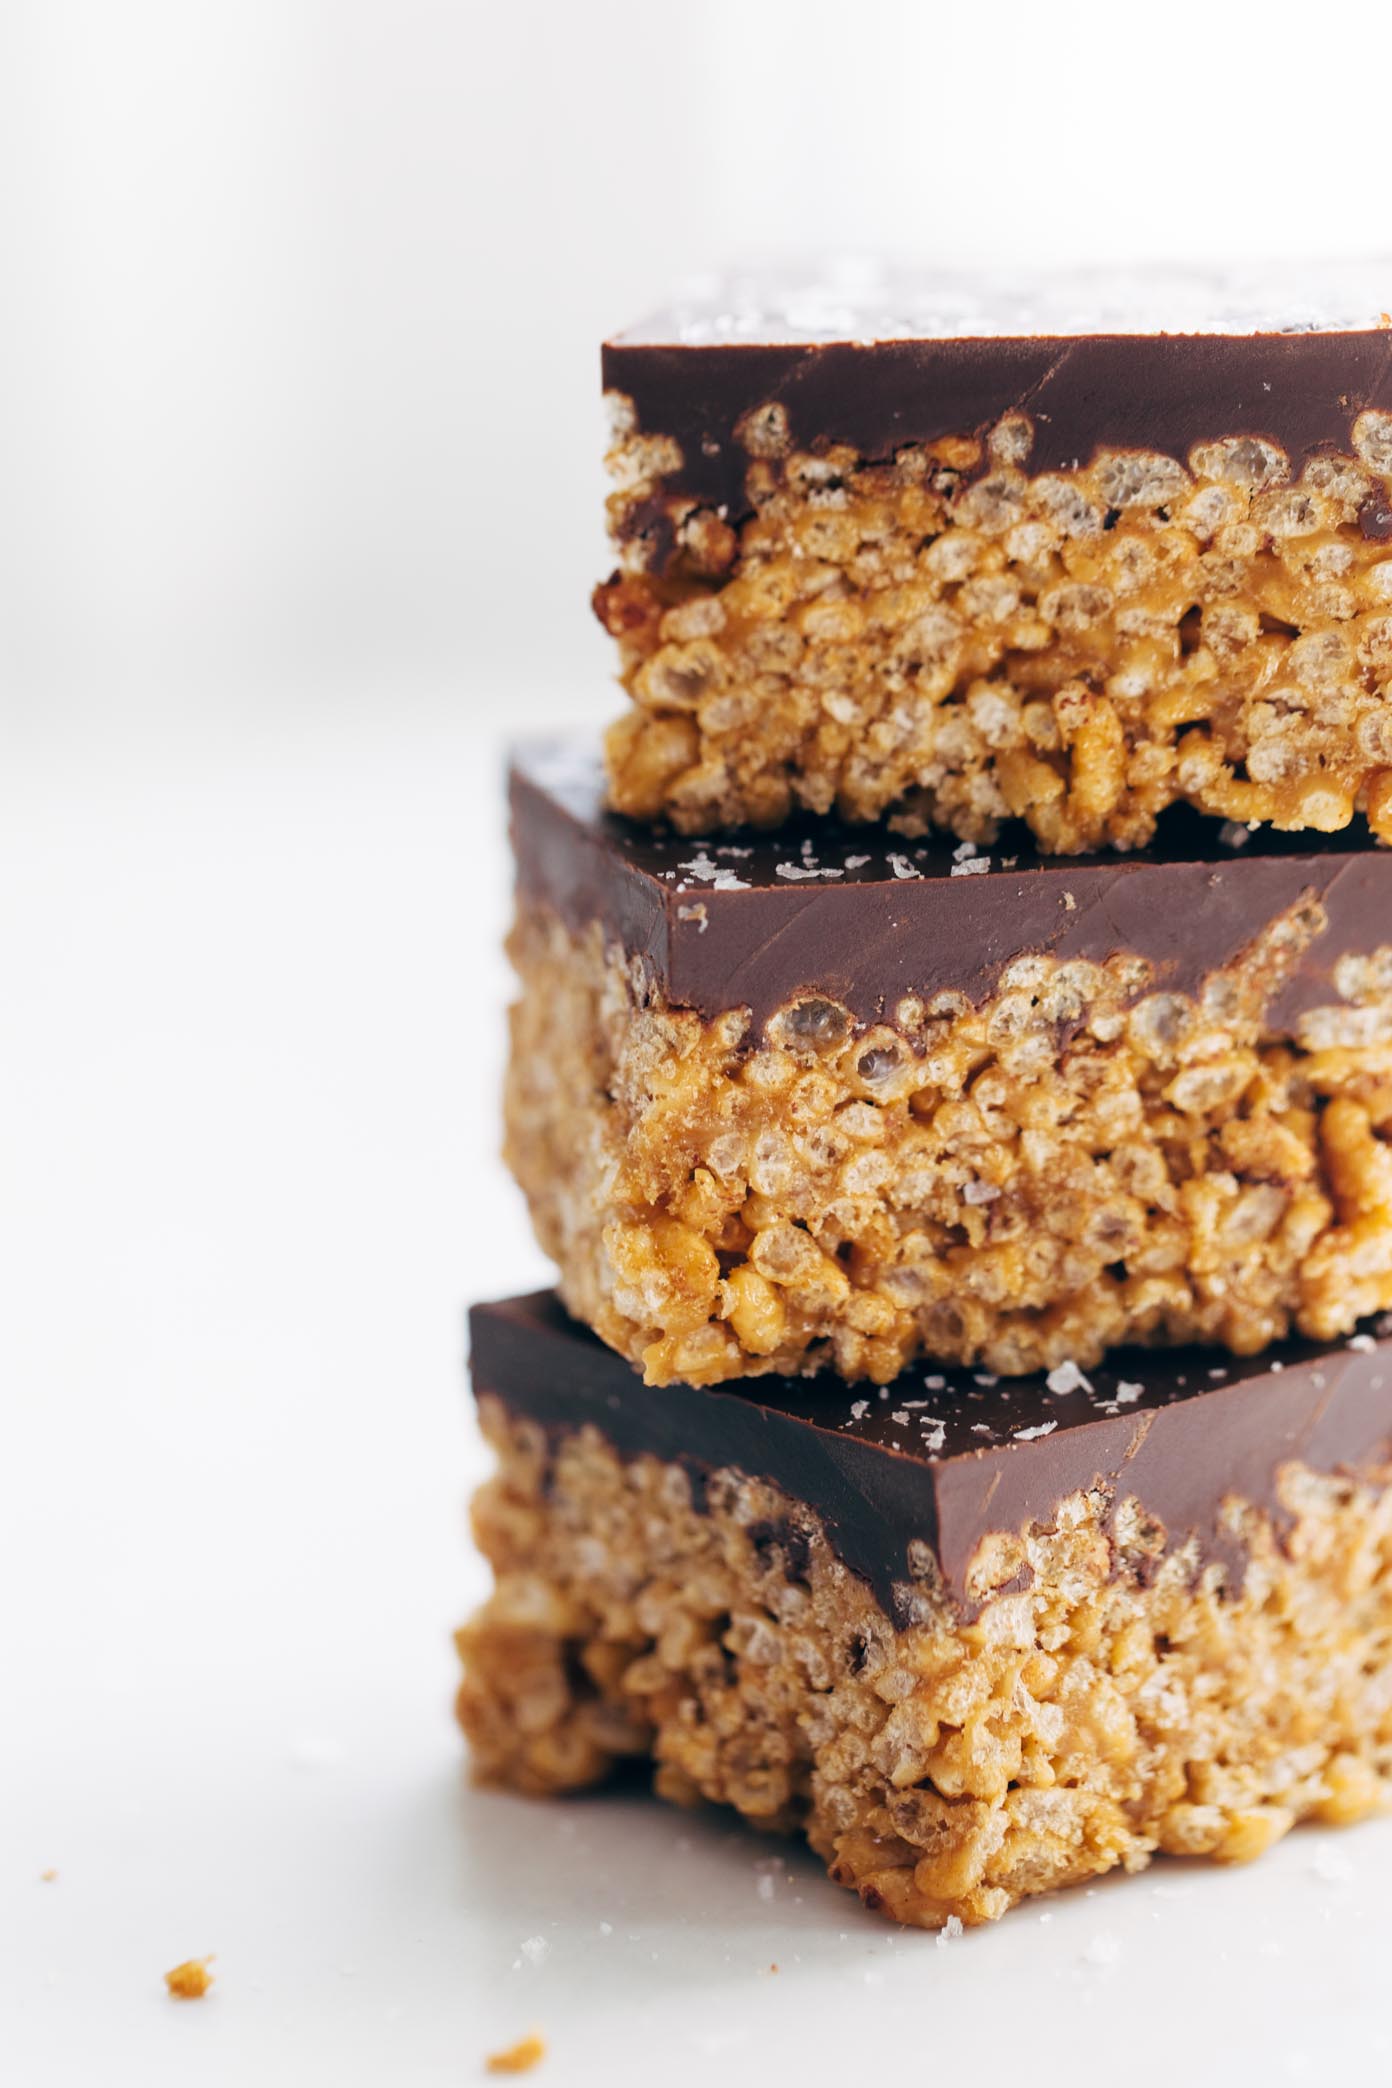 The classic chocolate-covered peanut butter rice krispie bars --> with 5 ingredients and minimal refined sugar, thanks to a few modern swaps! my go-to for road trip snacks. | pinchofyum.com” width=”600″ height=”900″ srcset=”/wp-content/uploads/2017/09/Modern-Scotcheroos-5.jpg 1392w, http://cdn.pinchofyum.com/wp-content/uploads/Modern-Scotcheroos-5-200×300.jpg 200w, http://cdn.pinchofyum.com/wp-content/uploads/Modern-Scotcheroos-5-768×1152.jpg 768w, http://cdn.pinchofyum.com/wp-content/uploads/Modern-Scotcheroos-5-600×900.jpg 600w” sizes=”(max-width: 1392px) 100vw, 1392px”></p>
<p>Sticky-sweet, lightly crispy peanut butter rice krispie mixture topped with a thick layer of melted chocolate and sprinkled with magical flakes of sea salt. That’s all, thank you and goodnight Twin Cities!</p>
<p>Friends, this is the food I was raised on. In the background of every family and school event of my childhood lies a scratched and dented 9×13 of almost-gone scotcheroos. It is simple Midwestern goodness and it should not be messed with.</p>
<p>Except, I did one thing: I messed with it. Whyyyy.</p>
<p>As an anxious person finding her way through the world, I’d say I follow all rules of all places at all times exactly ALL THE TIME, but there is always that pesky 1% of the time at which point I become a rule-breaking, delinquent, rogue recipe “creative.” It is not wise to give me your classic recipes. I am not to be trusted with such precious, unbreakable things. I pinky promise I will take what is written and go off the rails with it.</p>
<p><img class=